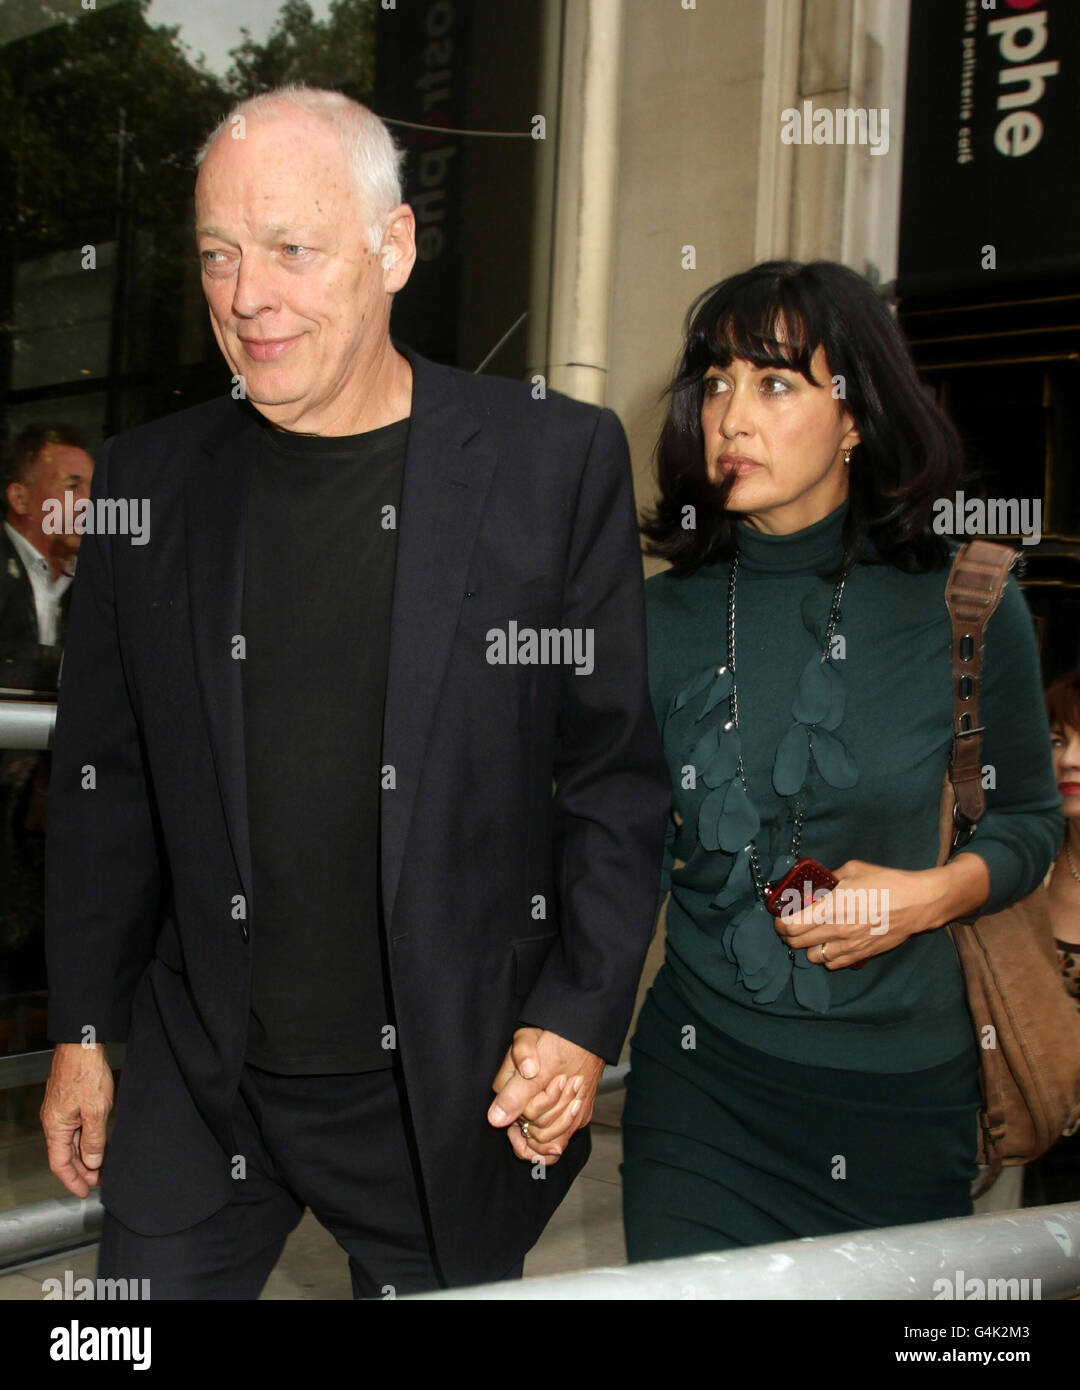 David Gilmour and wife Polly Samson, the parents of Charlie Gilmour, leave the Royal Courts of Justice, London, after hearing a plea on behalf of their son for a cut in his 16-month jail sentence for going on a drink and drug-fuelled rampage at a student fees protest. Stock Photo